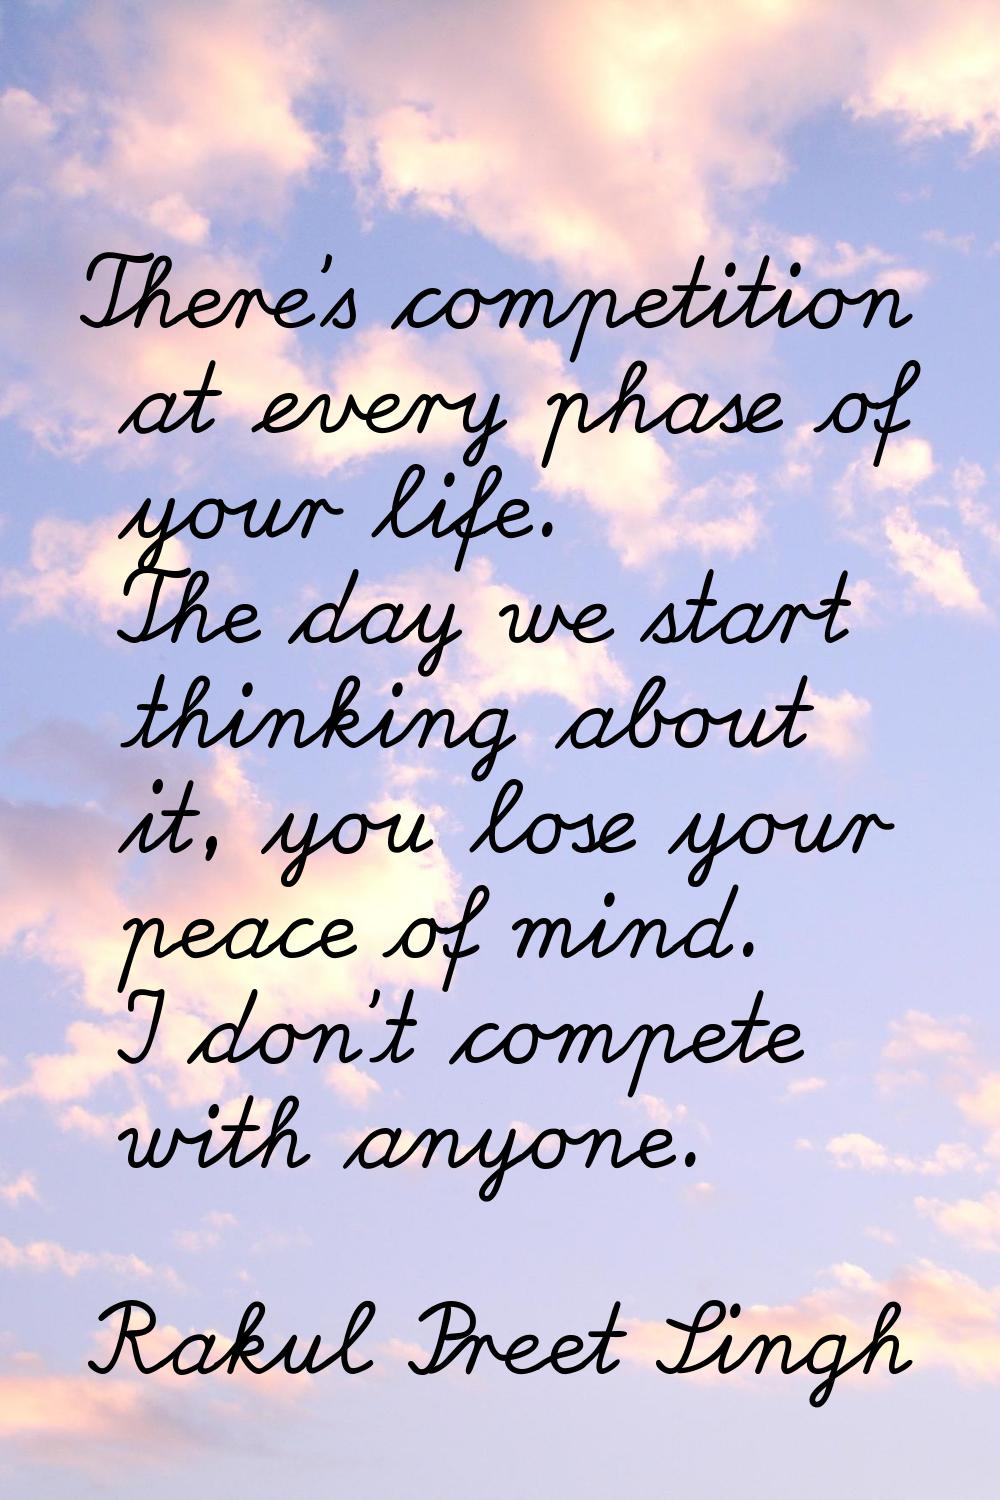 There's competition at every phase of your life. The day we start thinking about it, you lose your 